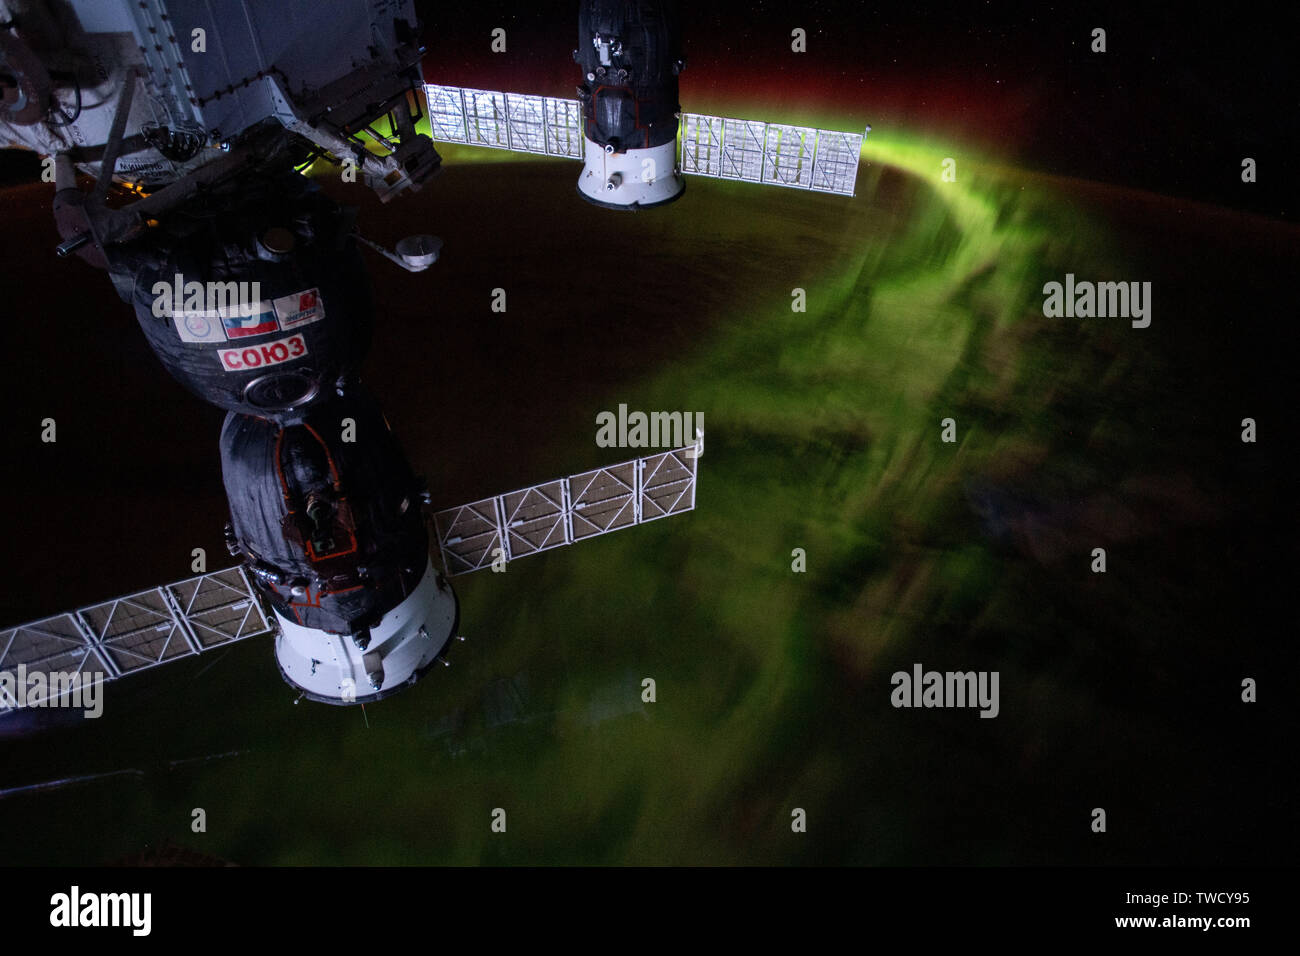 Two docked Russian spaceships, the Soyuz MS-12 crew capsule (foreground) and the Progress 72 resupply ship docked at the International Space Station with the aurora australis or southern lights shining below June 8, 2019 in Earth Orbit. Stock Photo